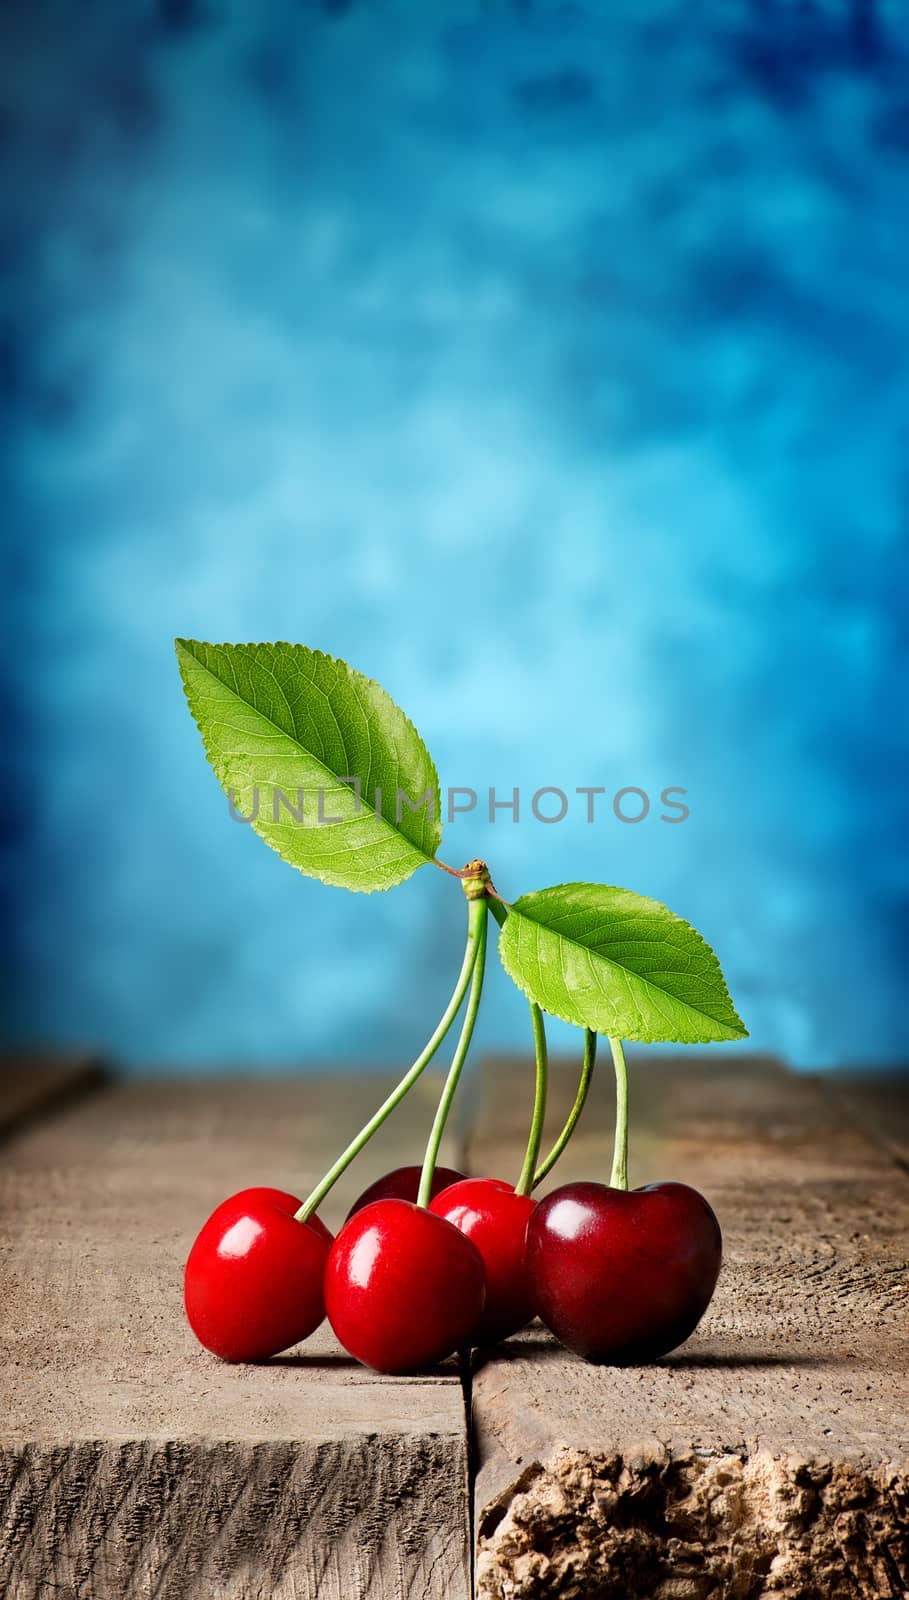 Cherries on wooden table on a blue background